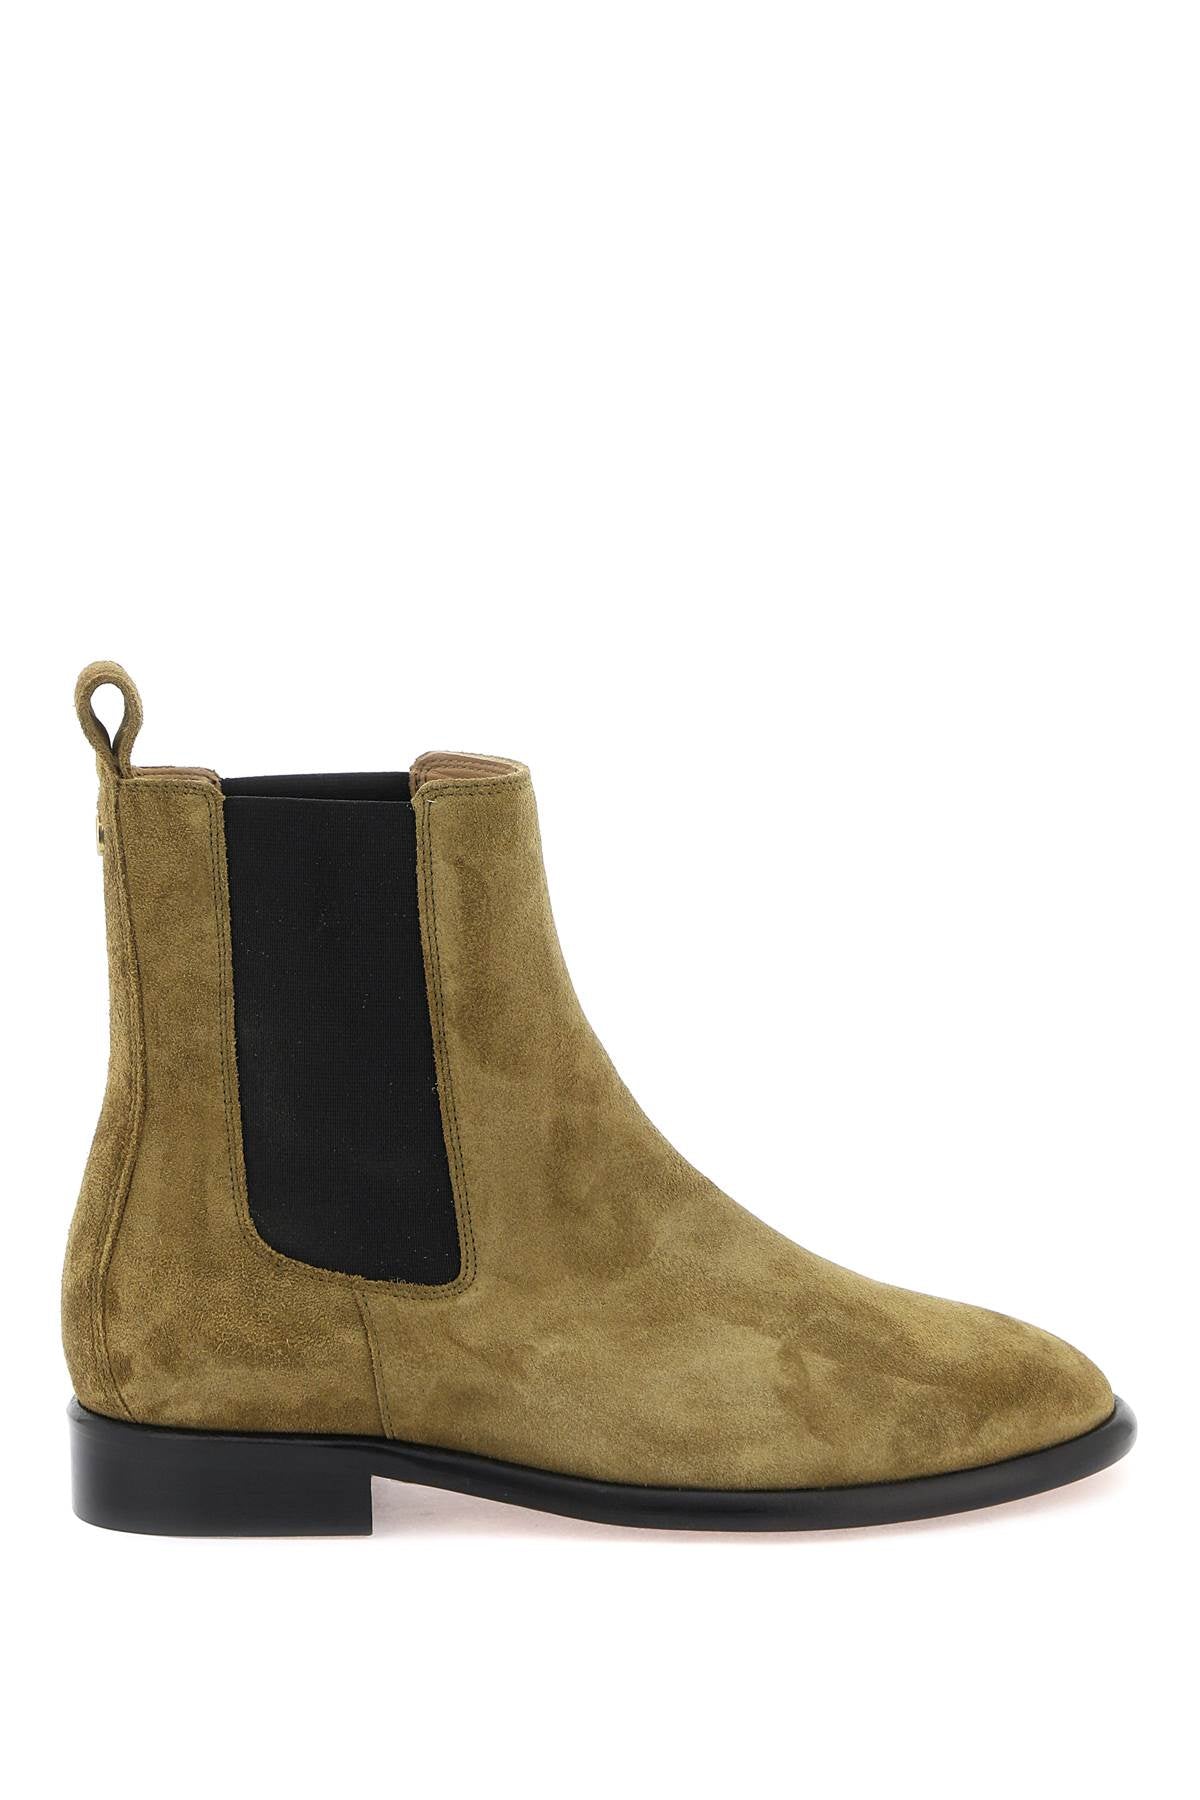 Colourful Suede Ankle Boots with Stretchy Inserts and Leather Lining